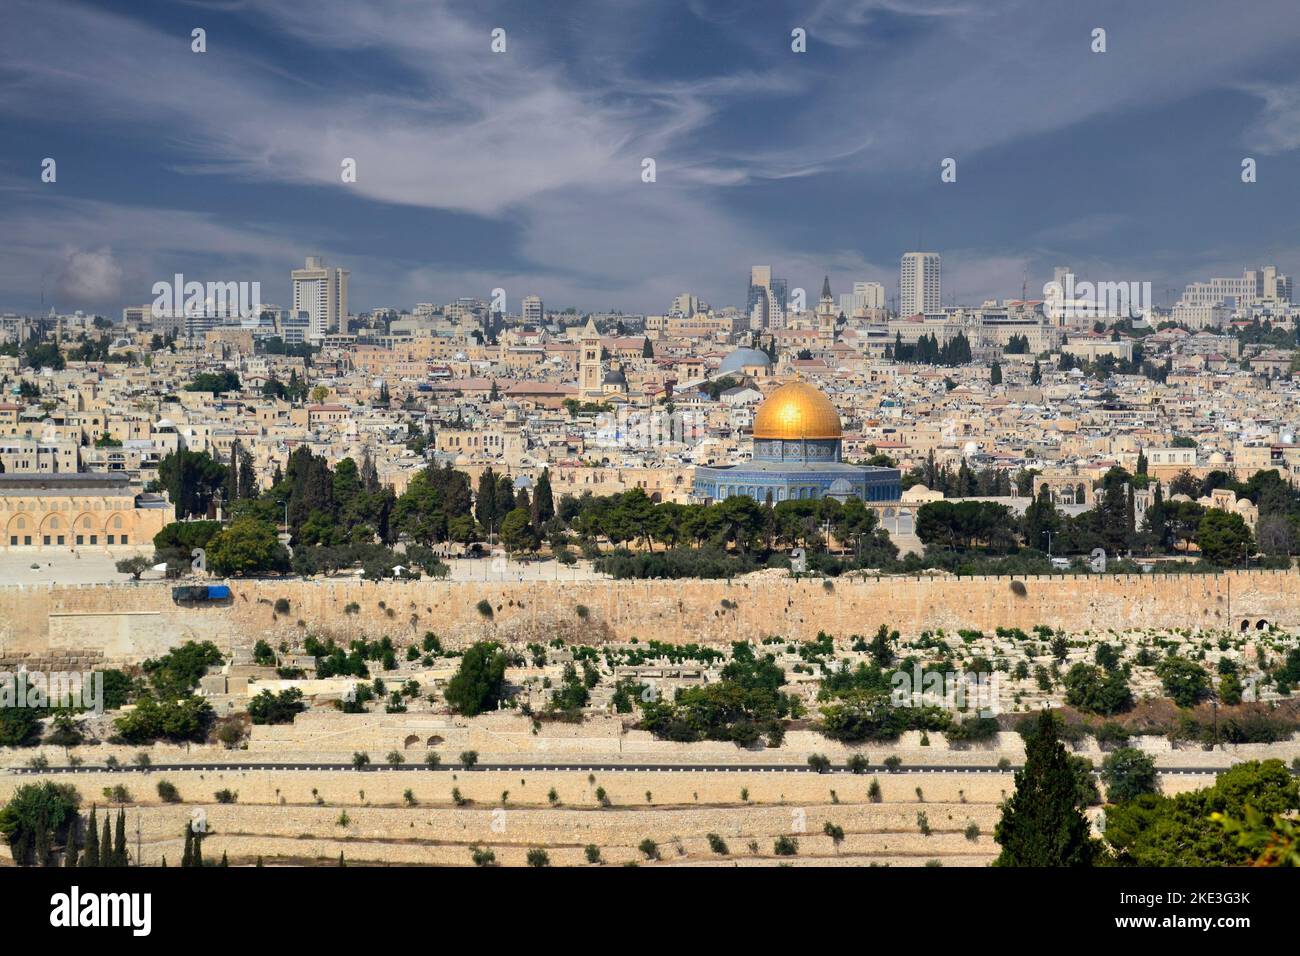 Israele Gerusalemme est Veduta con in primo piano la moschea al-Aqsa | Israele East Jerusalem View with al-Aqsa mosque in the foreground Stock Photo